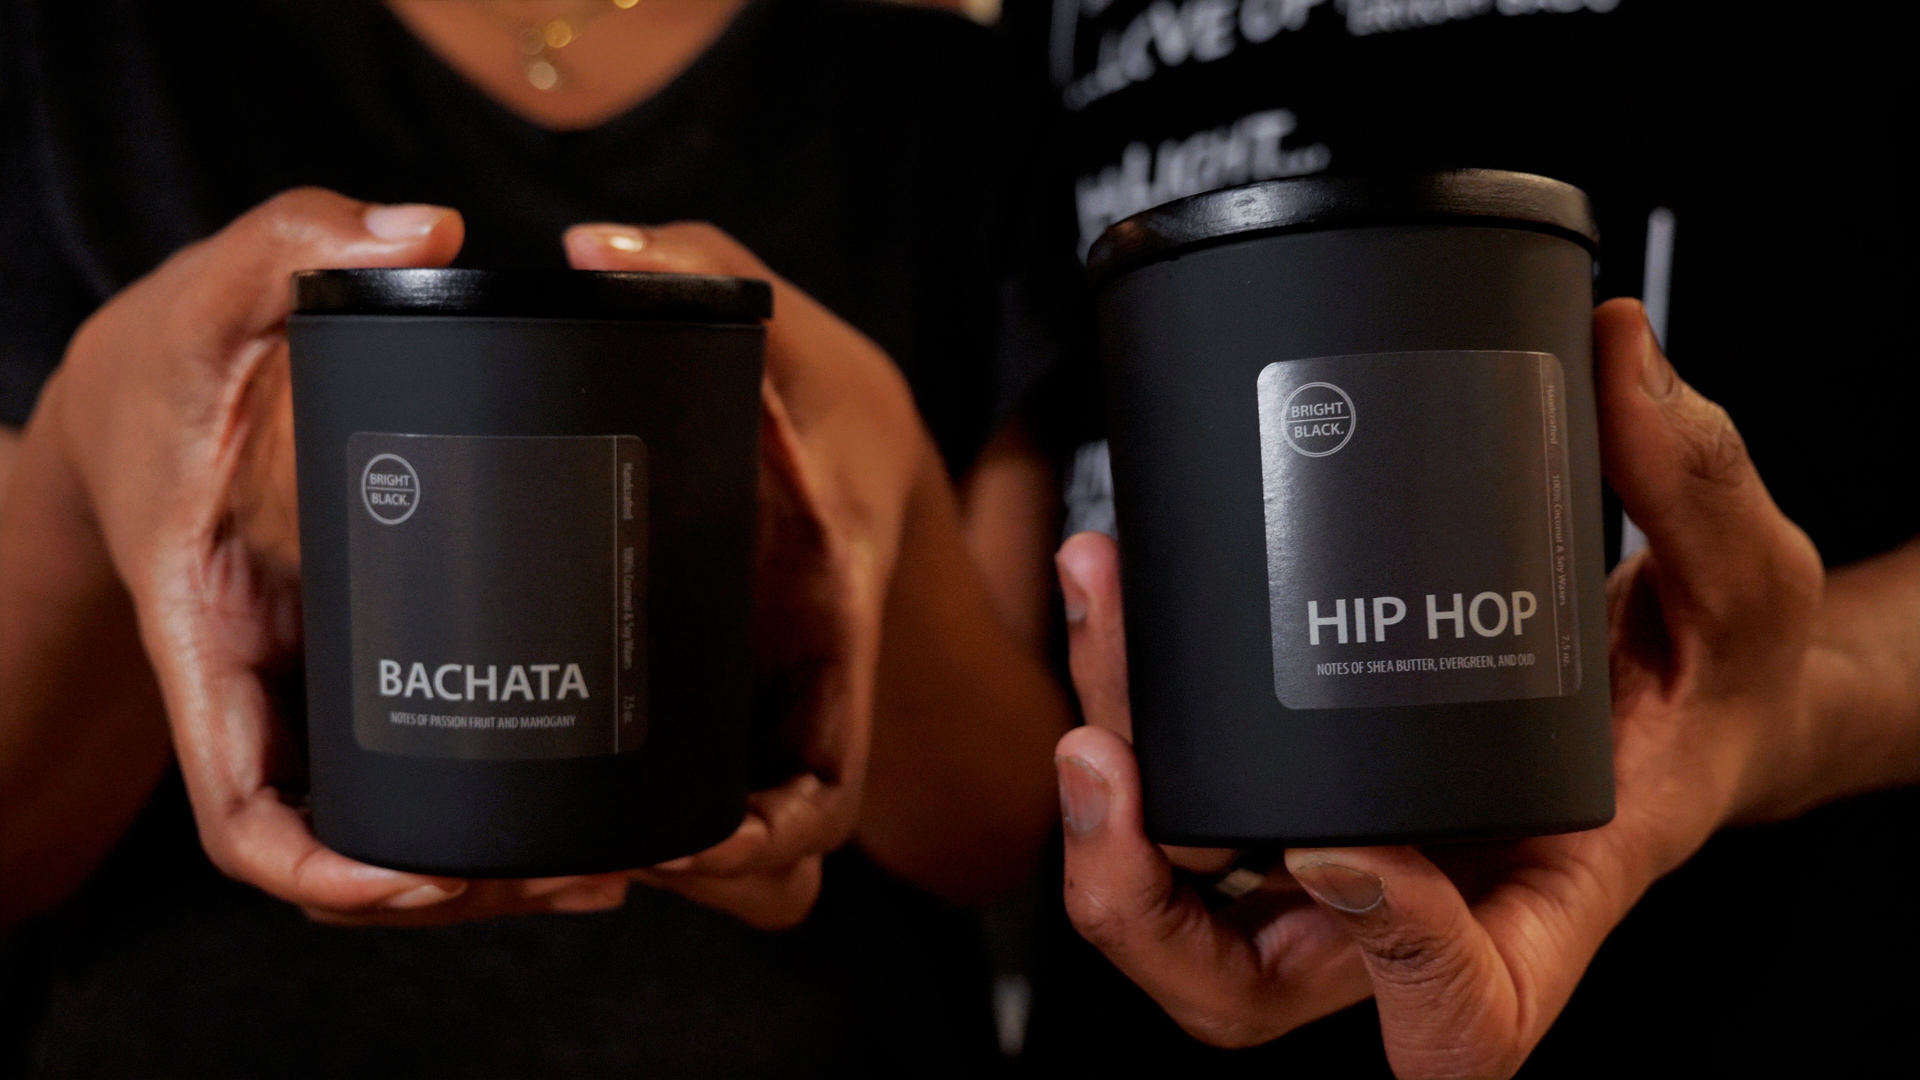 Hands holding candles with black containers and black lids. The candles are labeled Bachata and Hip Hop.